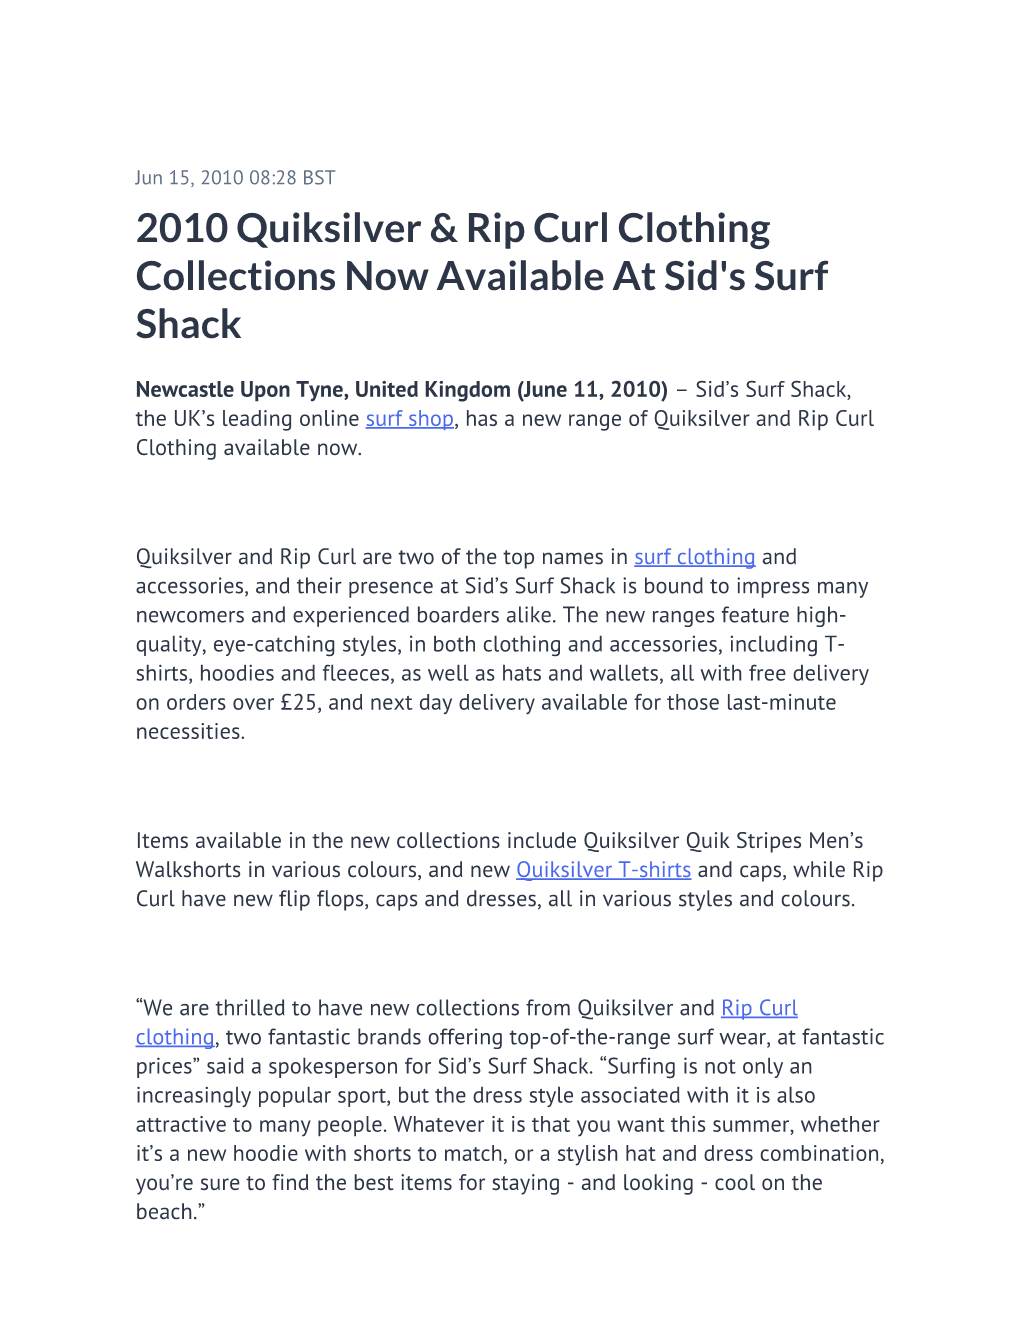 2010 Quiksilver & Rip Curl Clothing Collections Now Available at Sid's